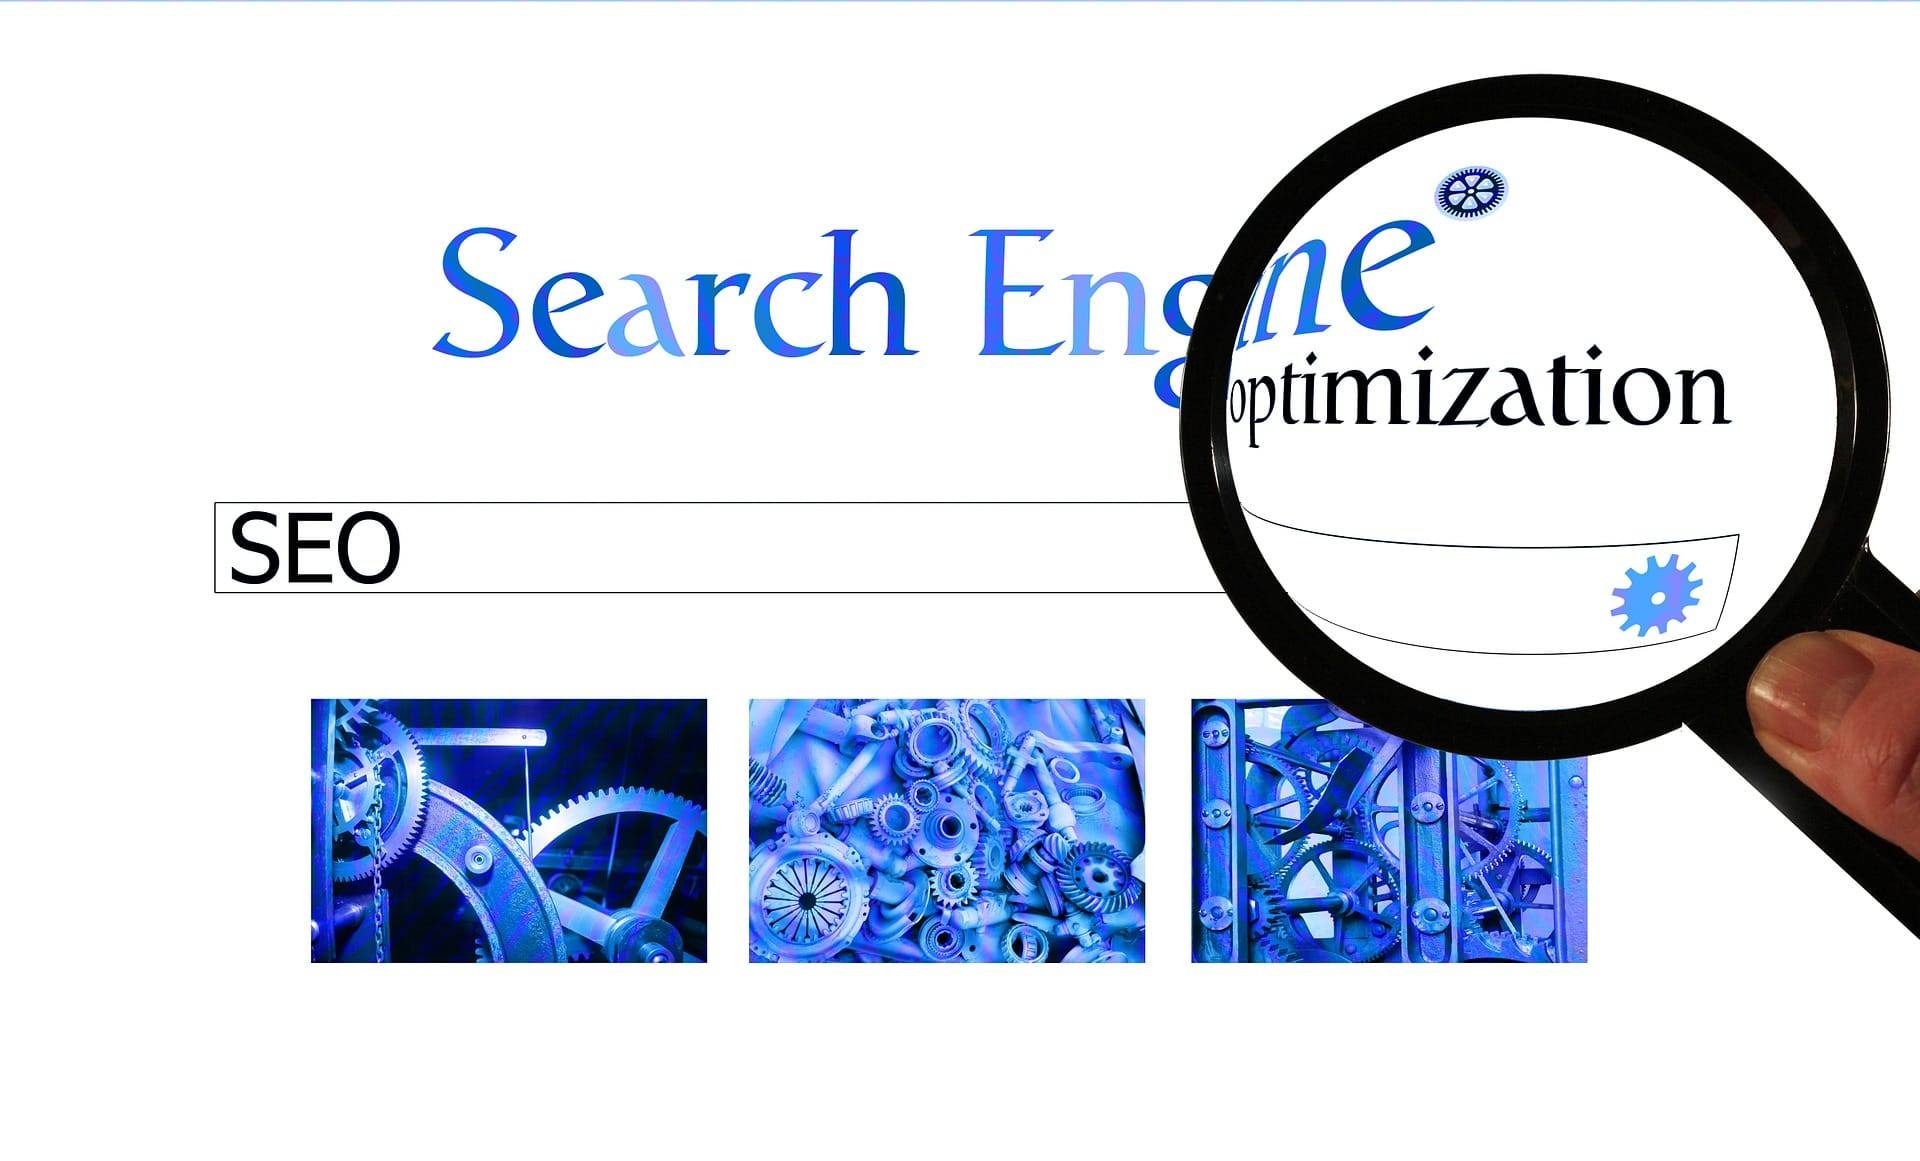 SEO under a magnifying glass